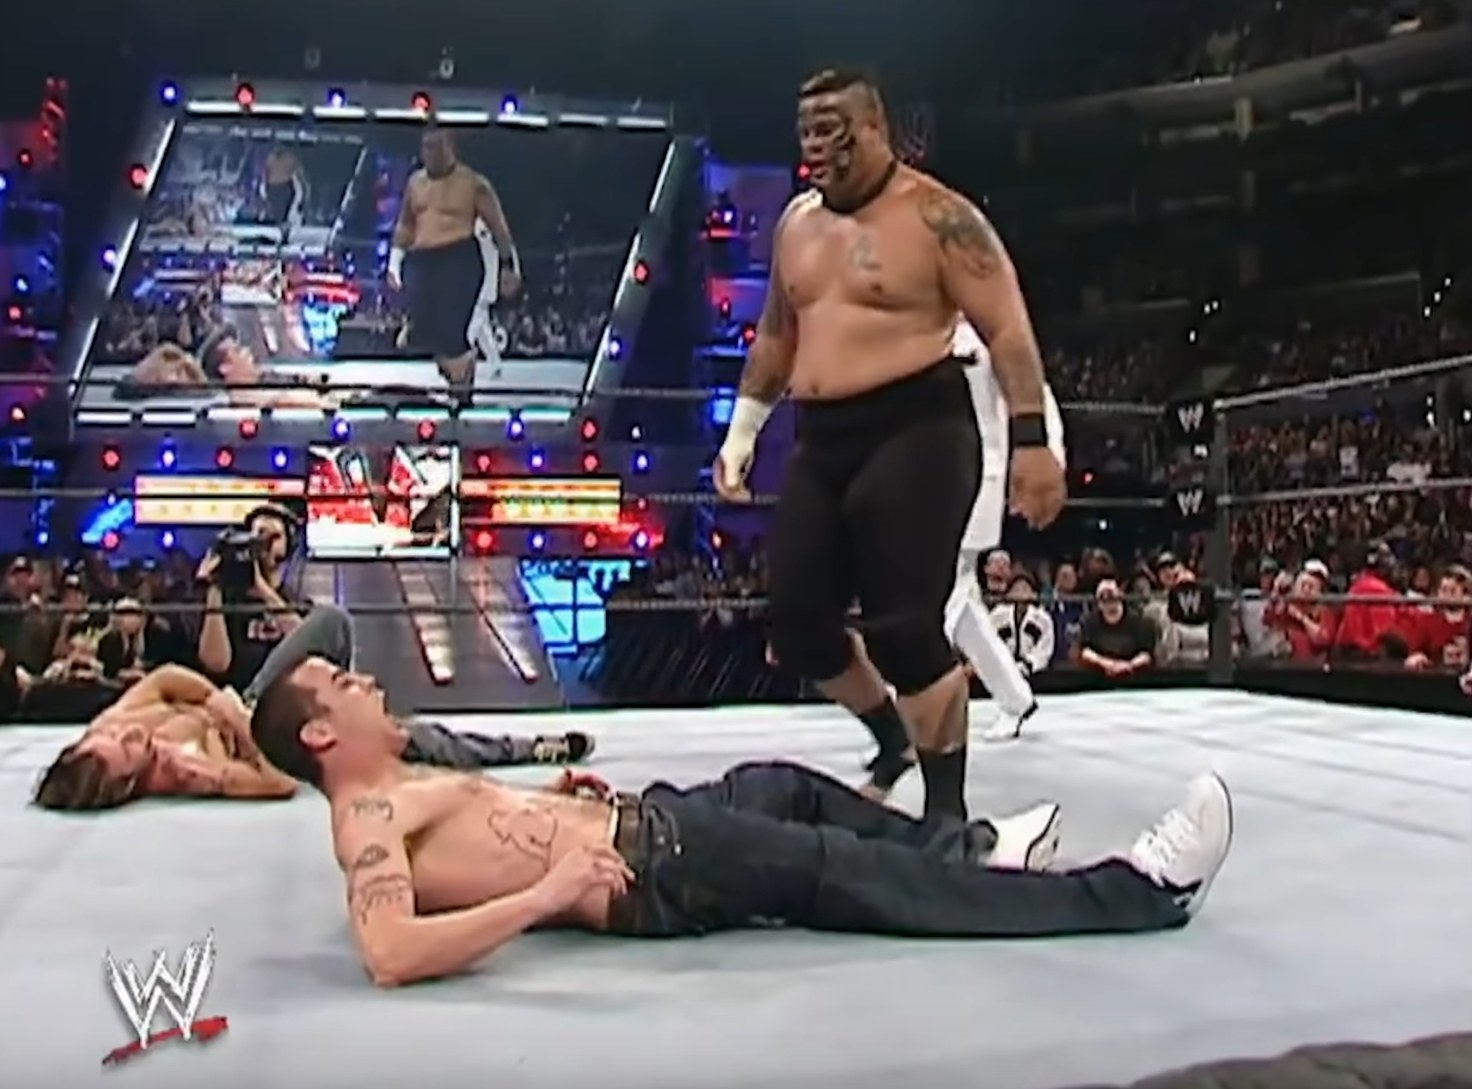 Steve-O screams in pain on his back in the ring while Umaga stands over him